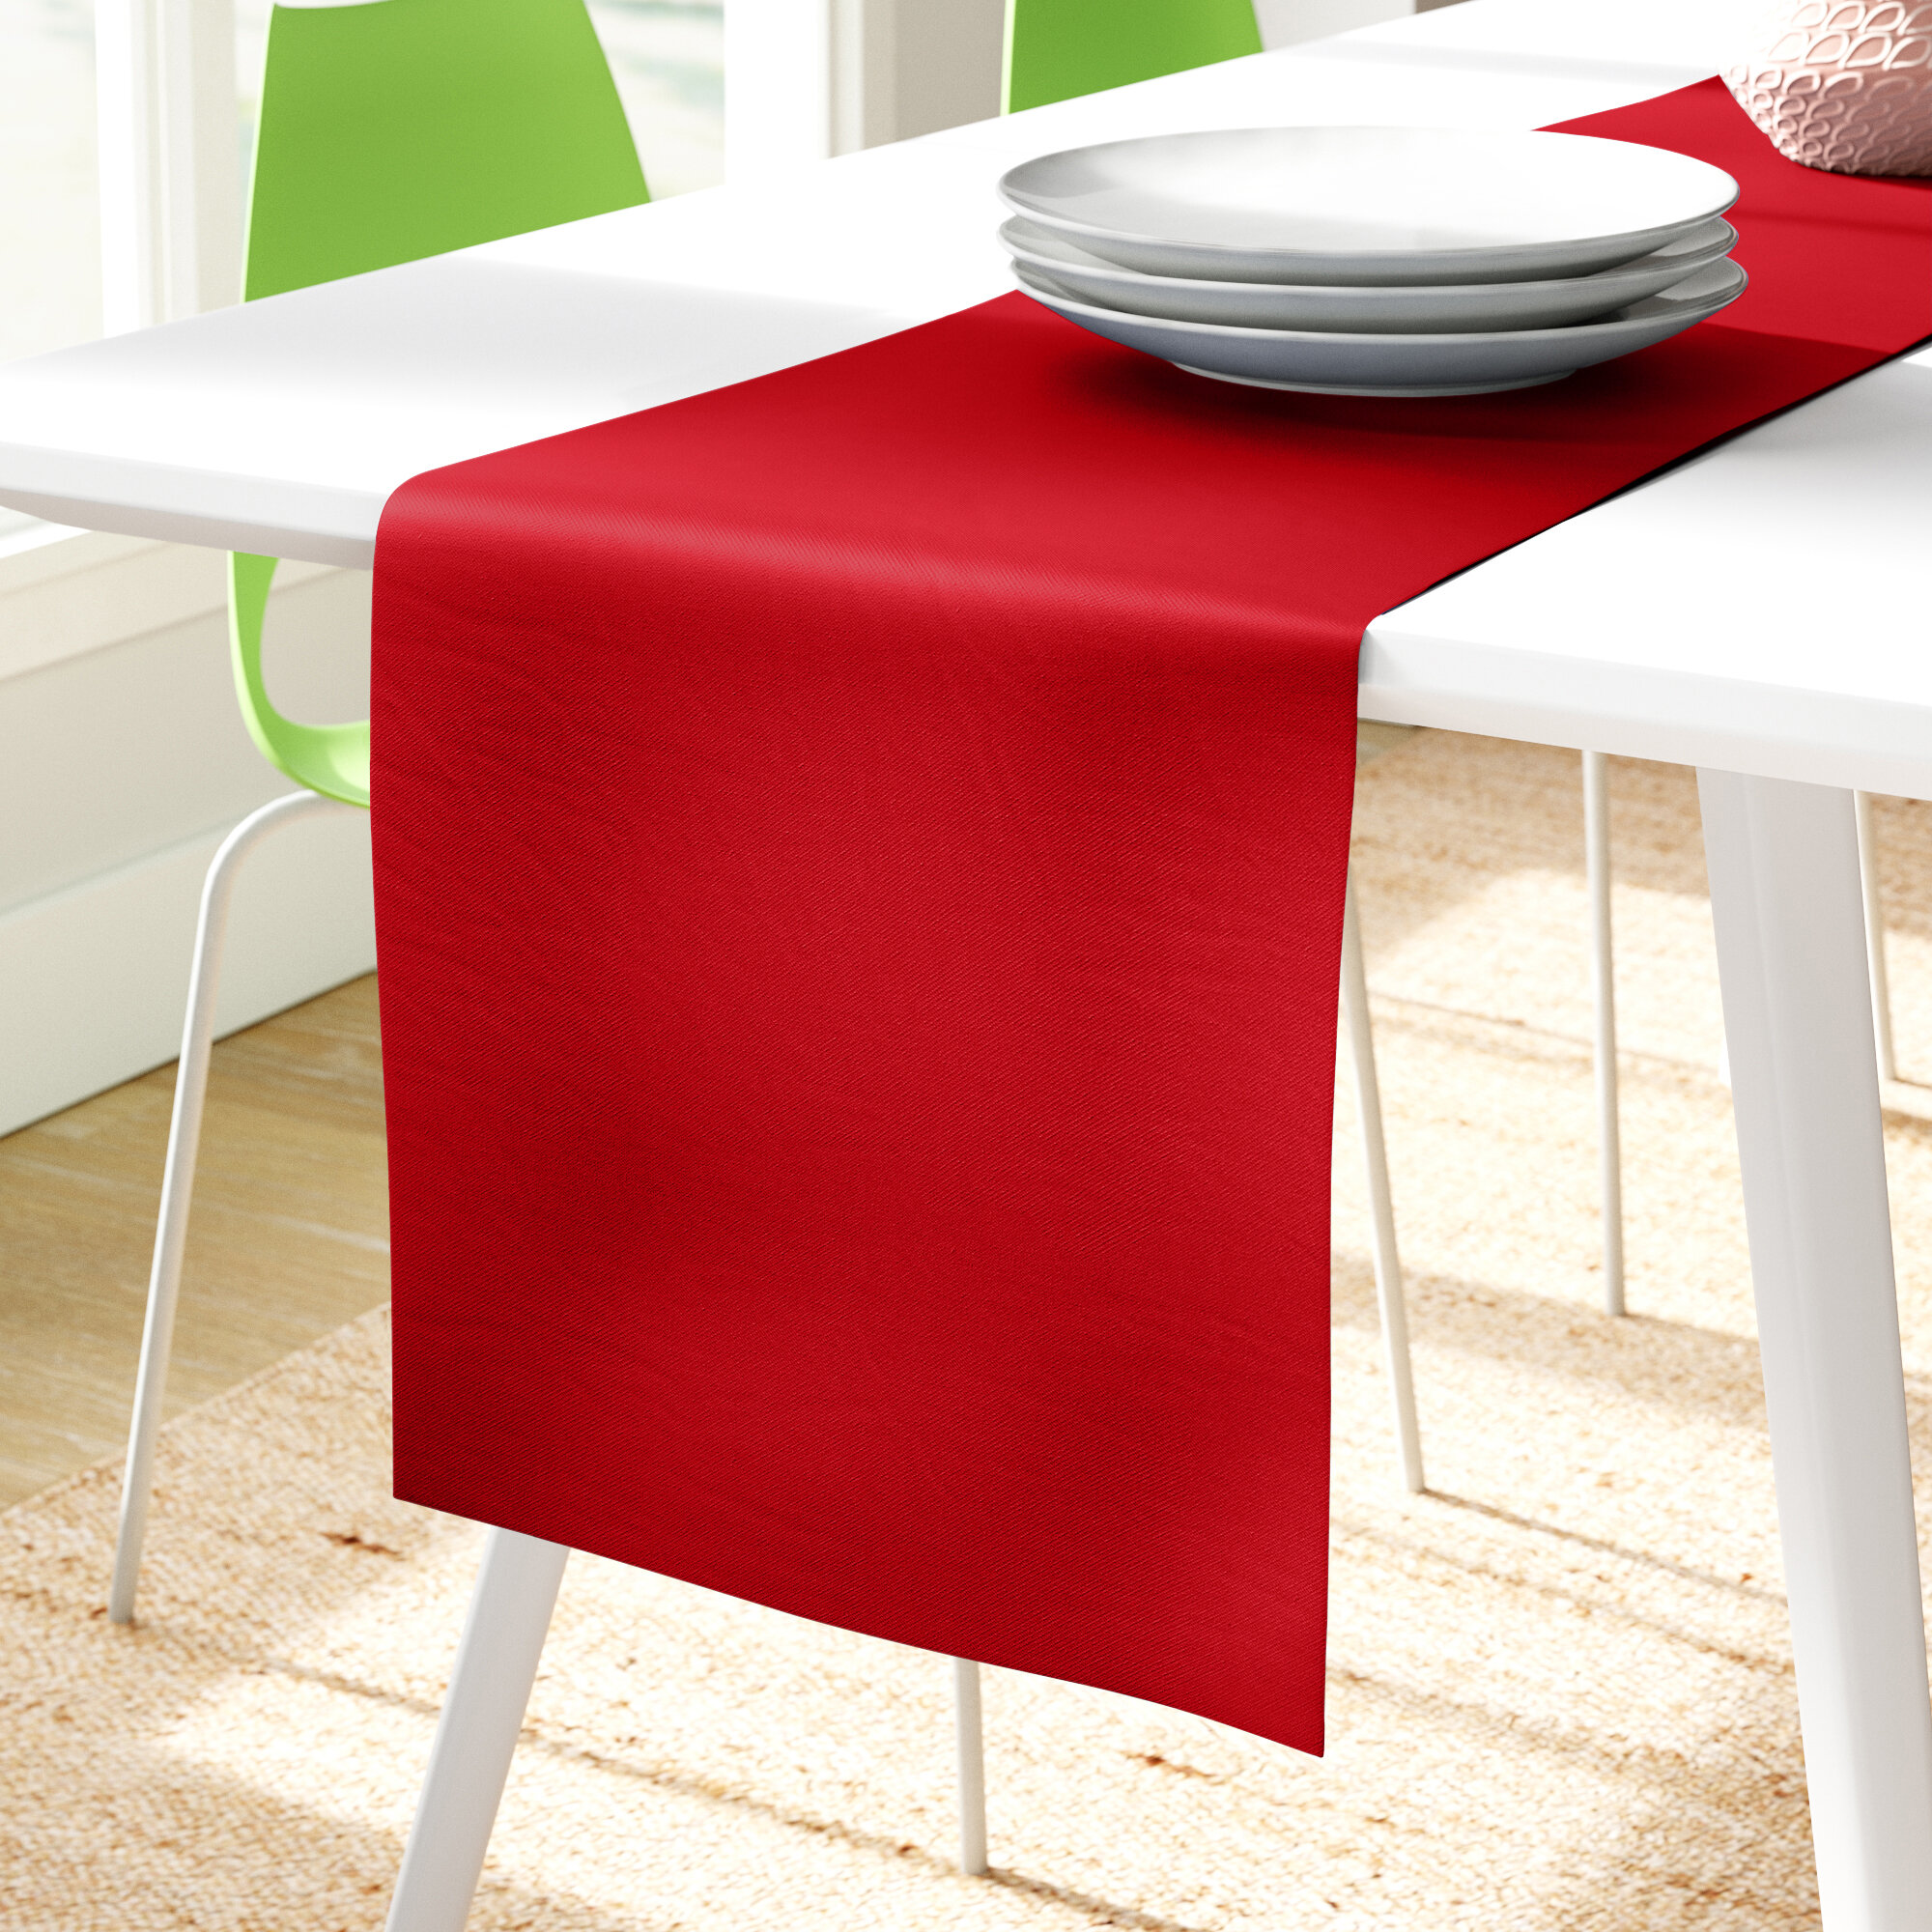 LUXURY PVC WIPE CLEAN VINYL TABLE CLOTH PLAIN PRINTED TRADITIONAL MULTI PARTY 